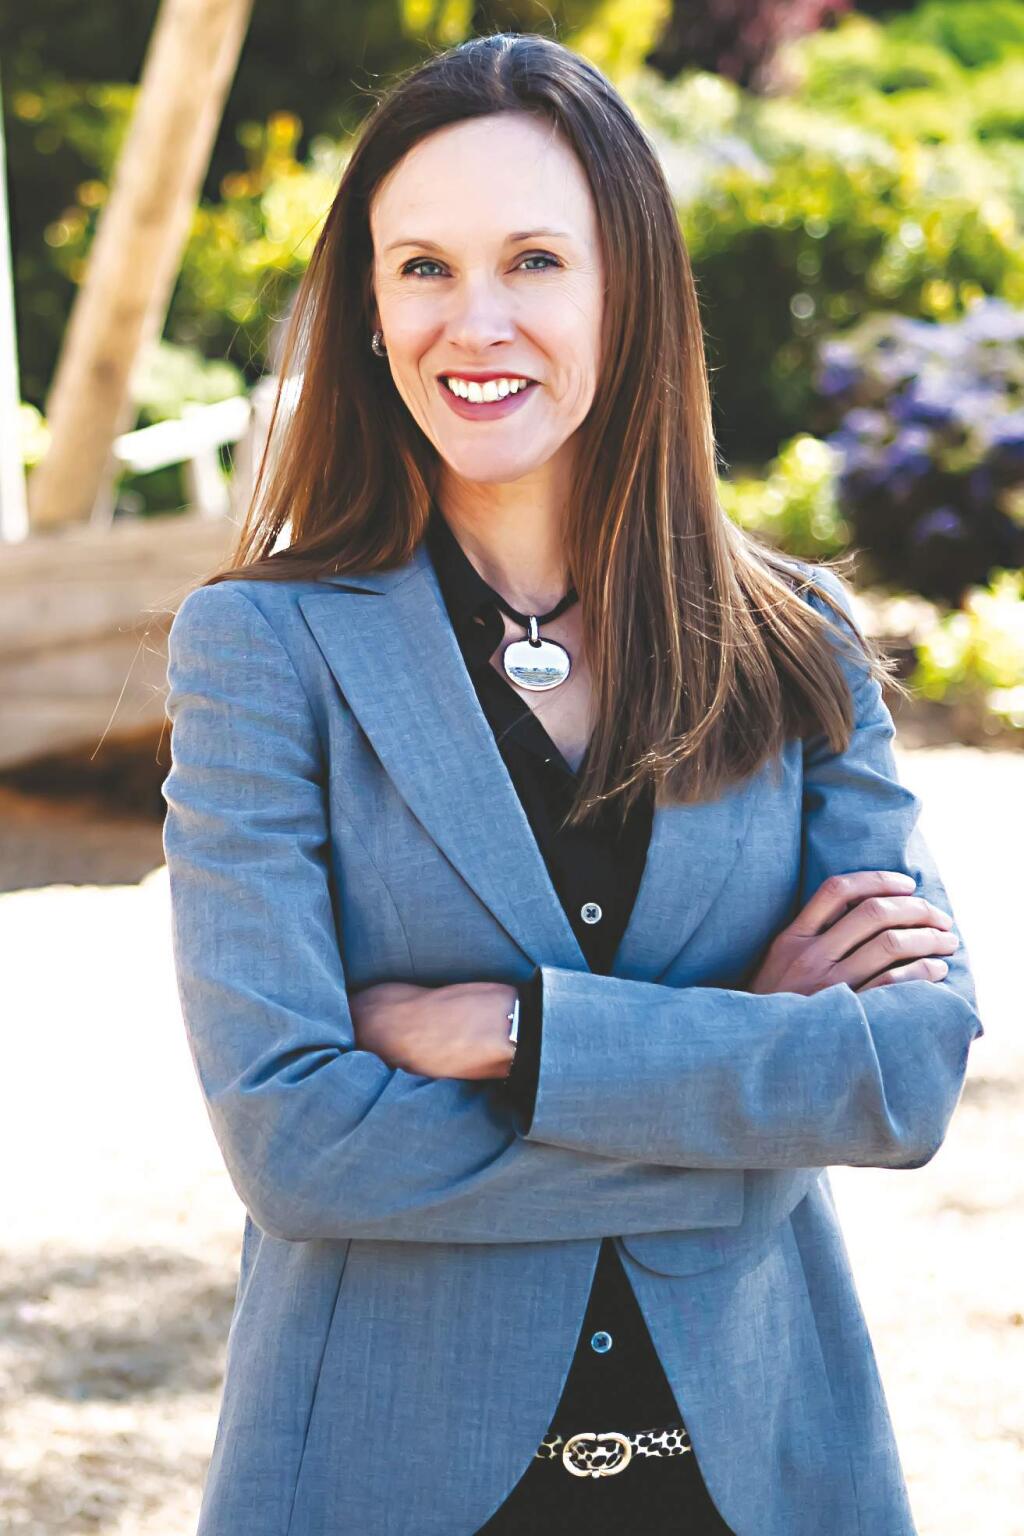 Karyn Flynn, CEO of Bay Area Discovery Museum in Sausalito